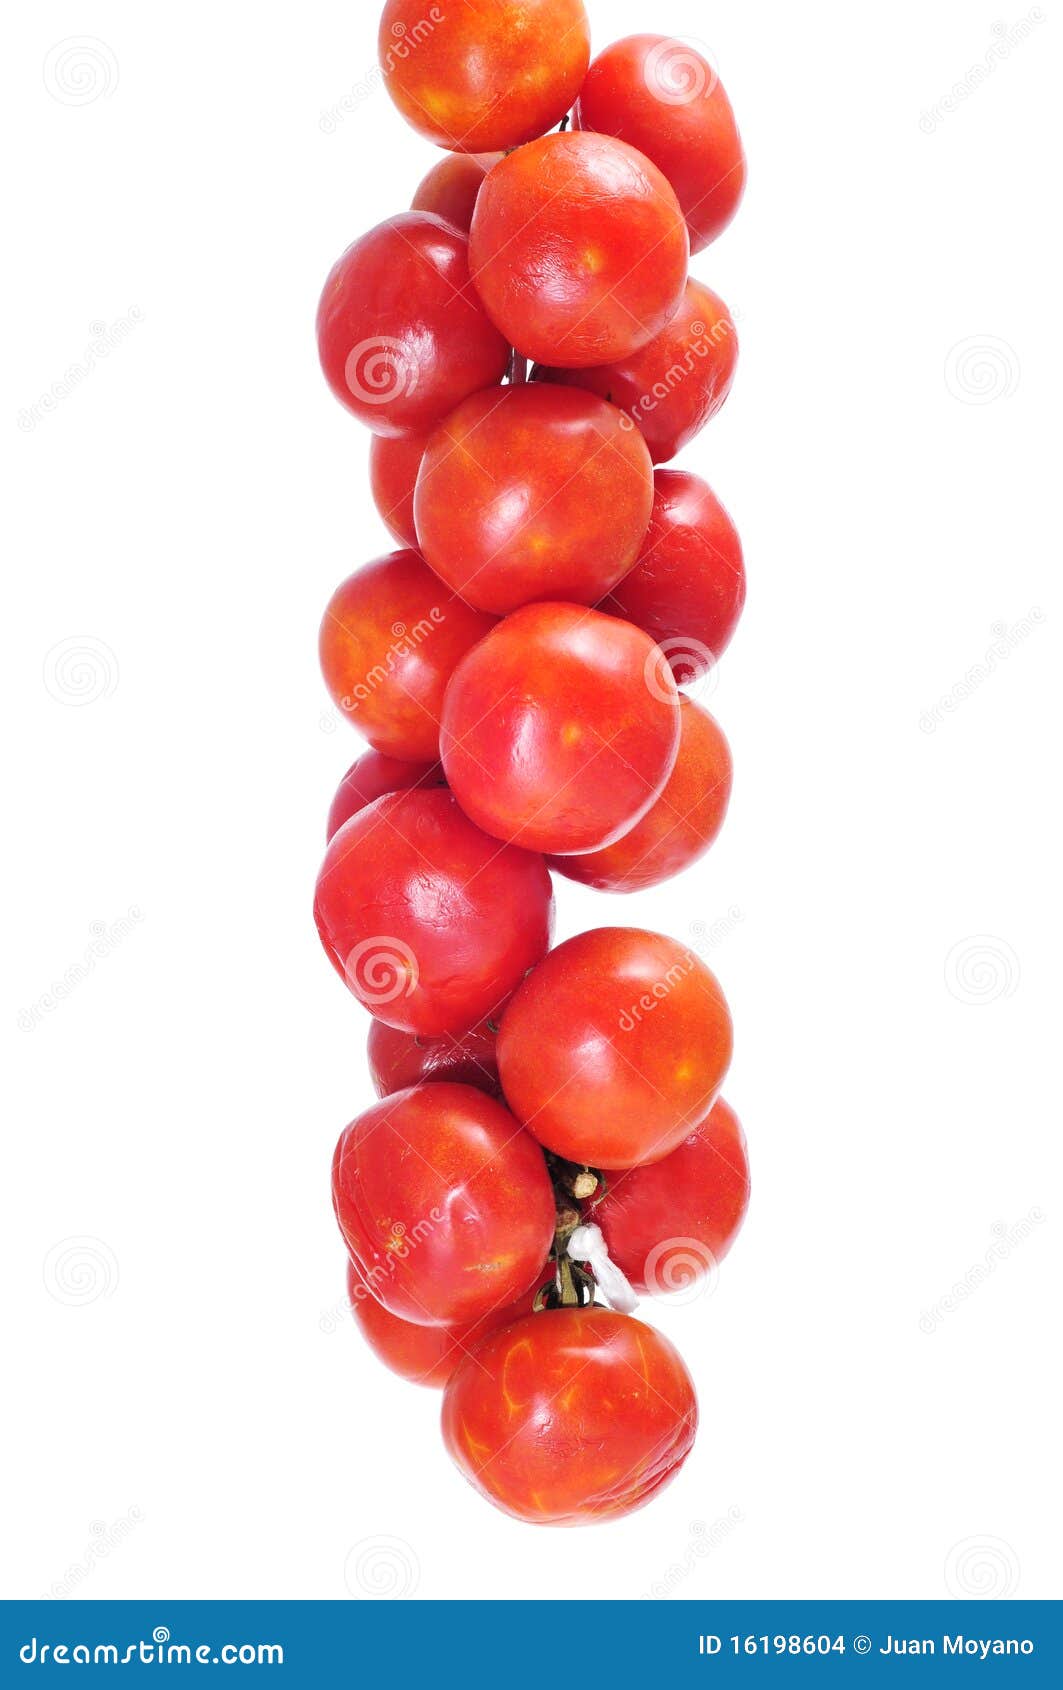 string of tomatoes